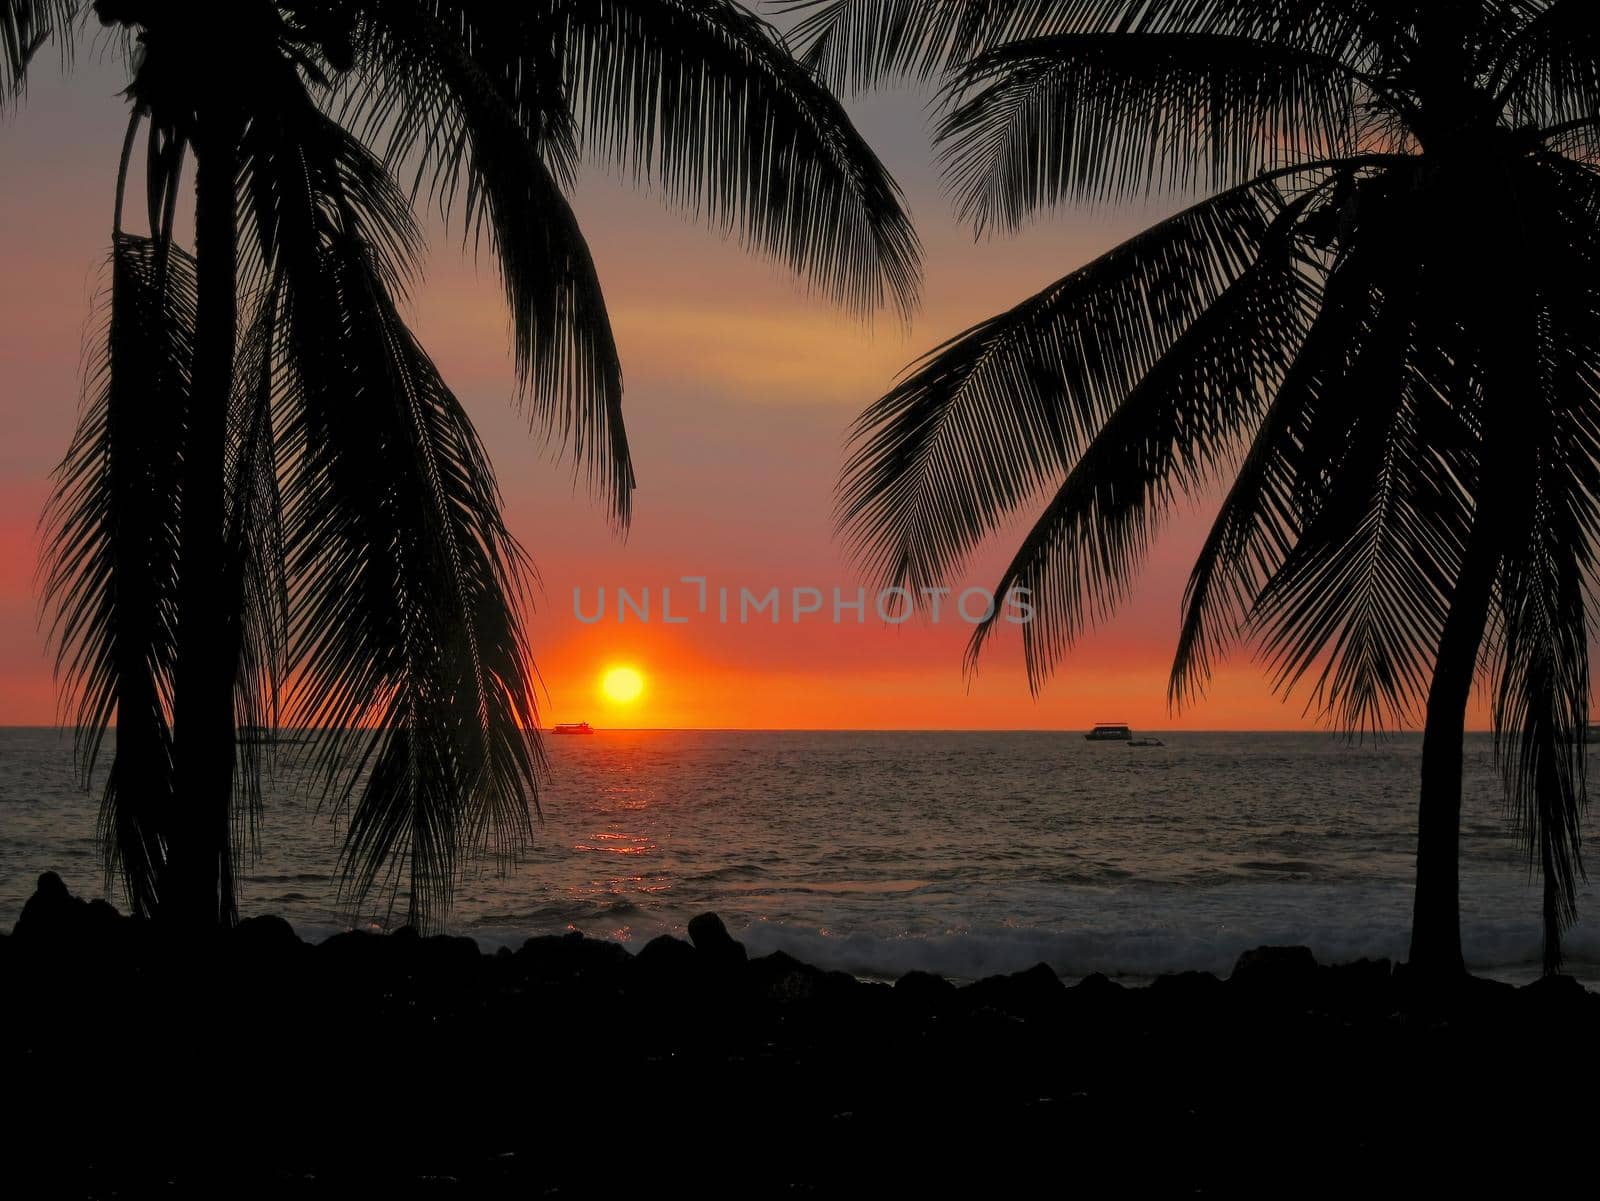 Silhouette of Palm Trees at Sunset With Ocean in Background at Kona, Hawaii on the Big Island by markvandam